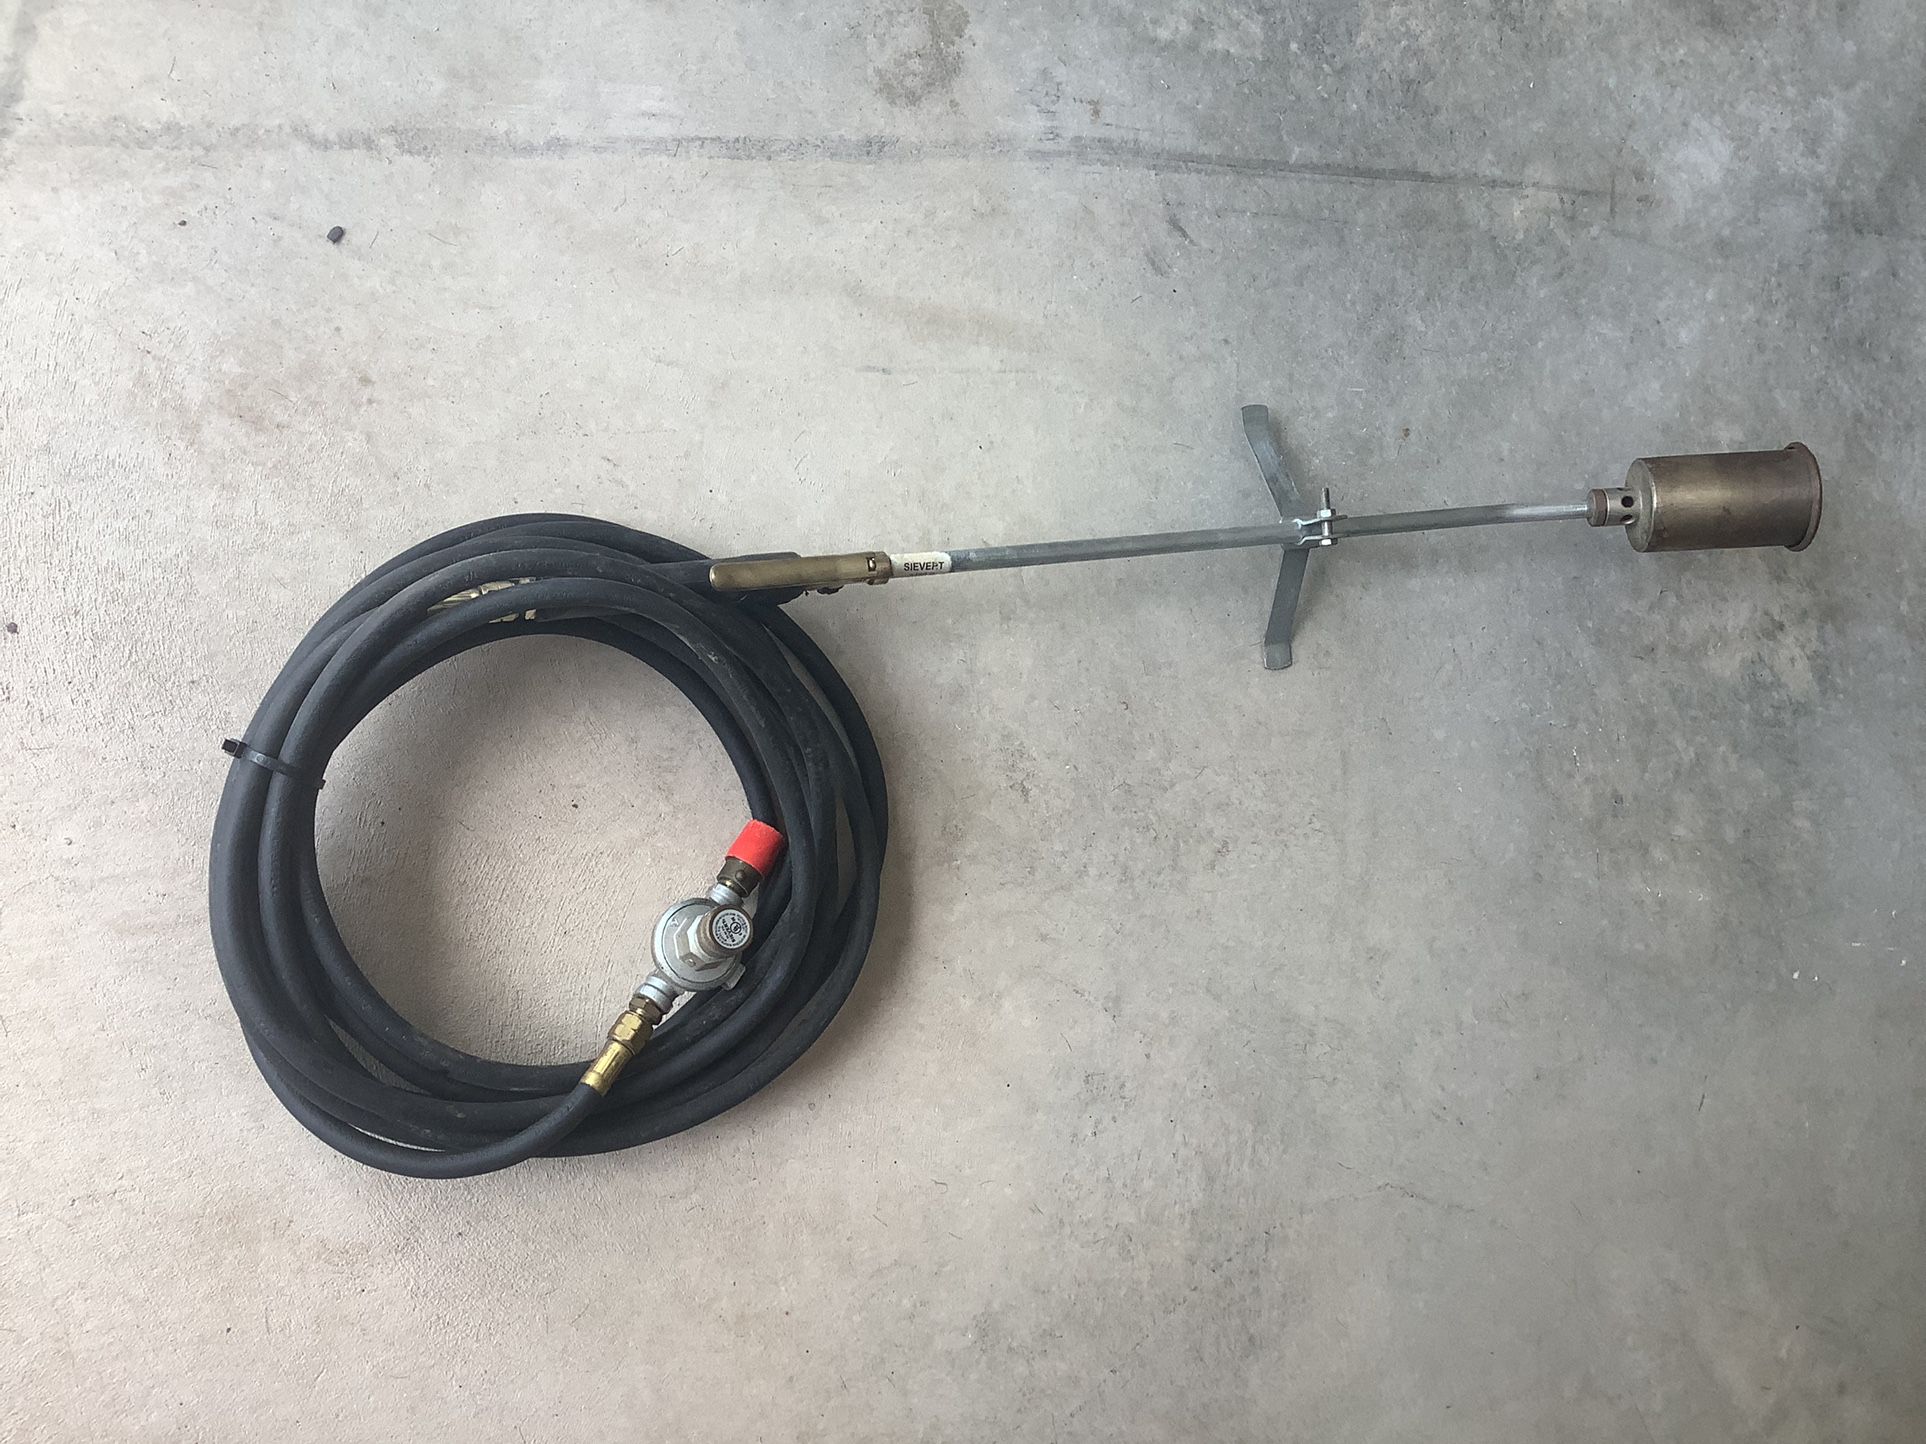 Roofers Torch Sievert 3460P Pro With 25’ Hose and Tank Regulator Seldom Used